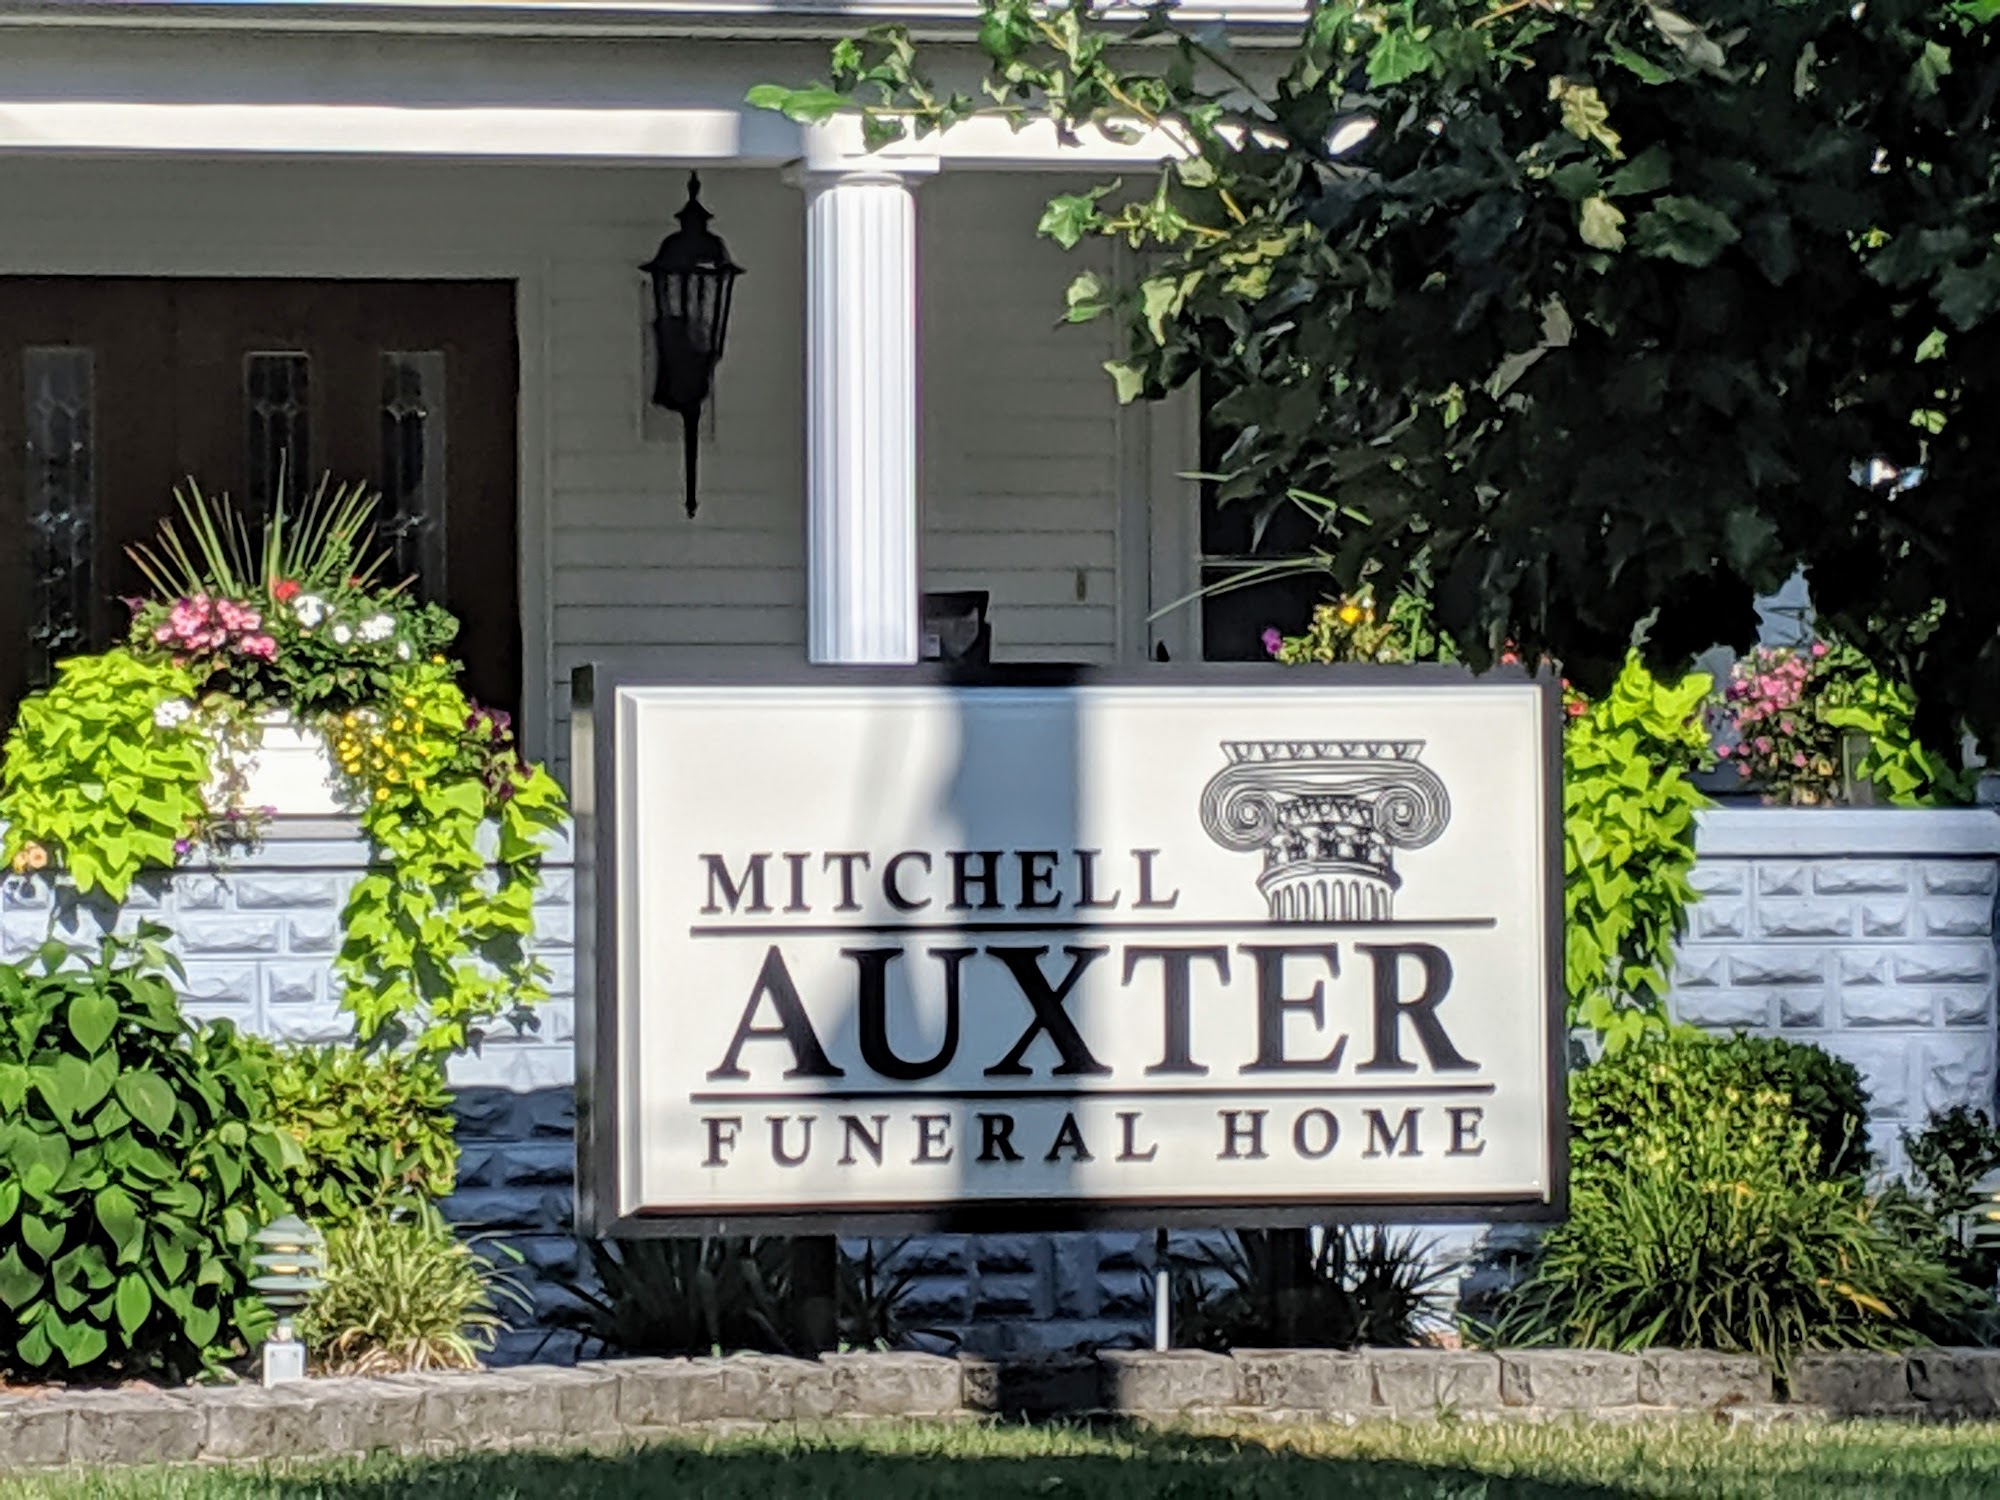 Mitchell-Auxter Funeral Home 218 S Main St, Clyde Ohio 43410